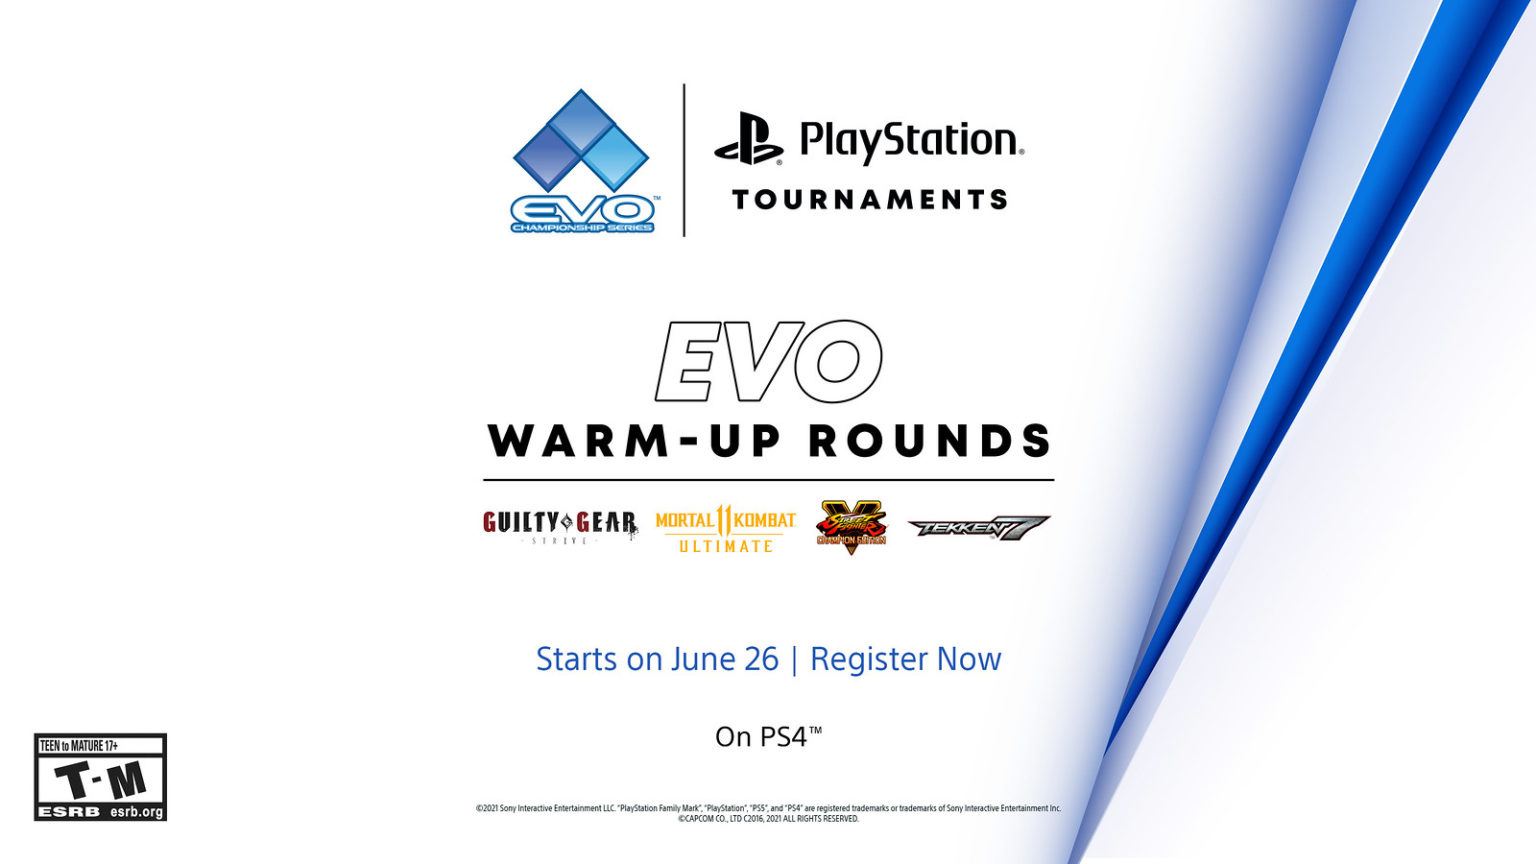 Sony to host Evo Community Series featuring more than 120 tournaments